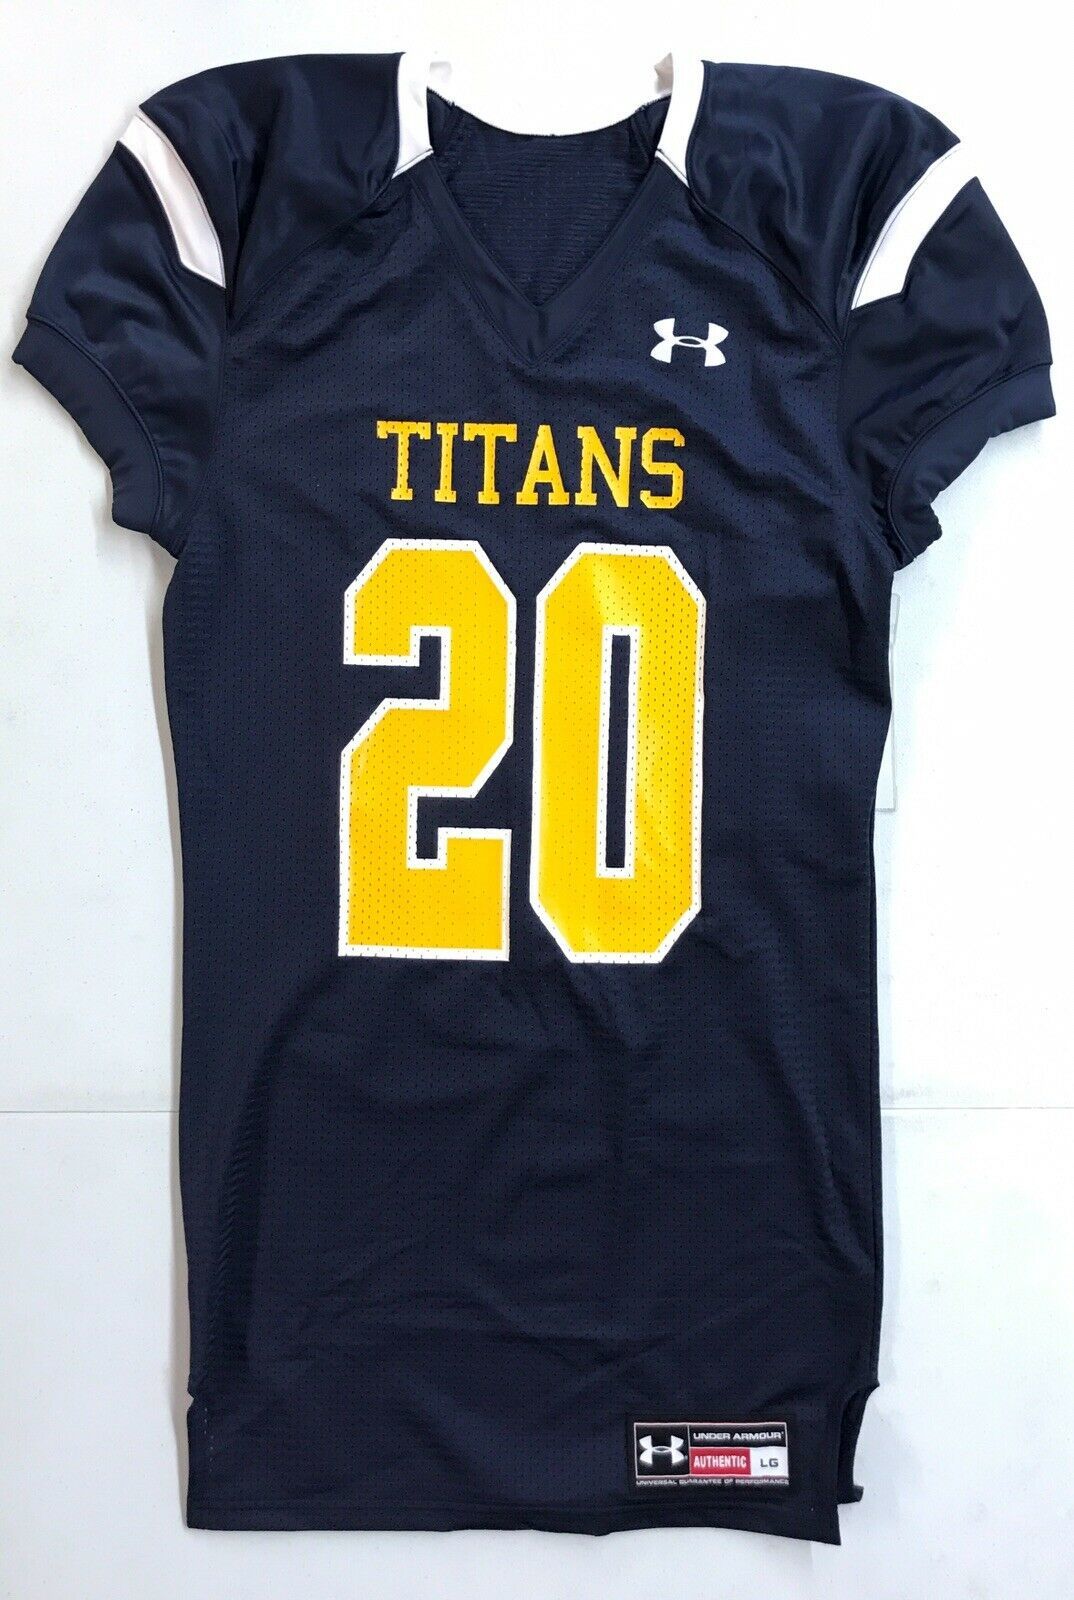 Primary image for New Under Armour Men's L Titans Stock Saber Football Jersey #20 Navy Tennessee